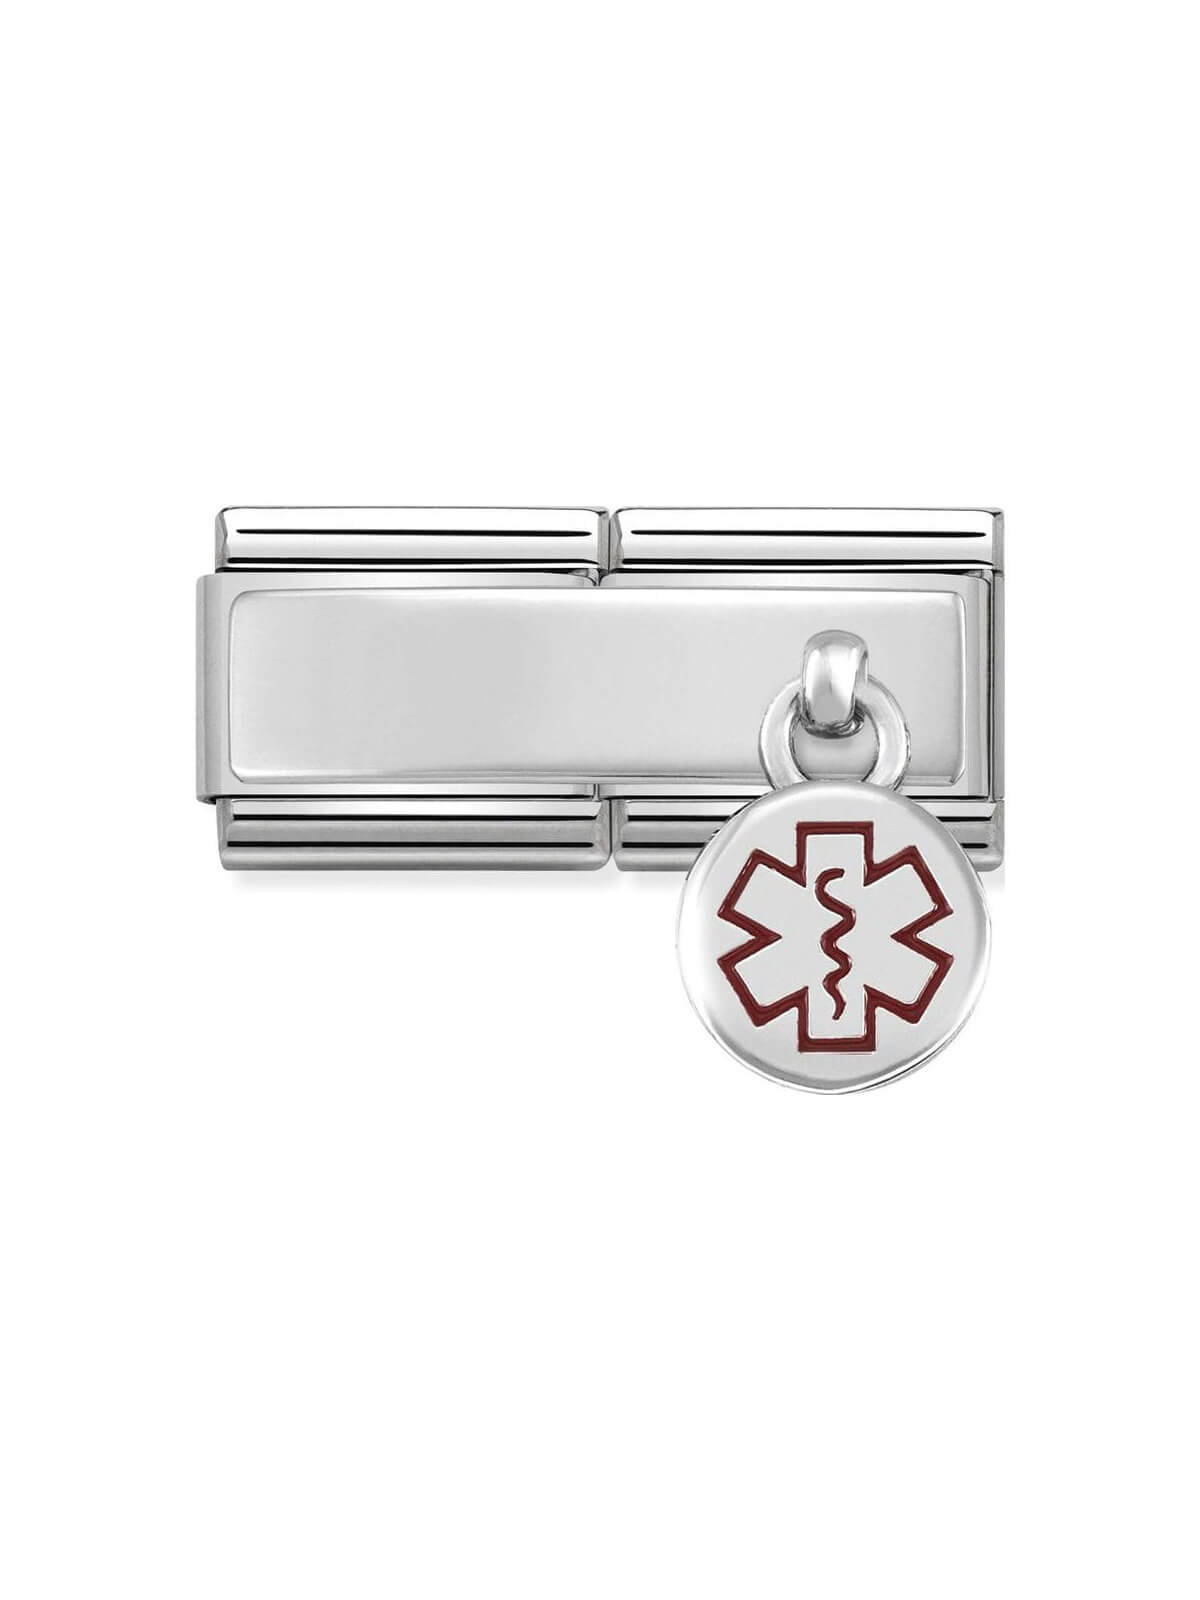 Nomination Classic Steel and Enamel Medical Tag Double Charm 330780-02